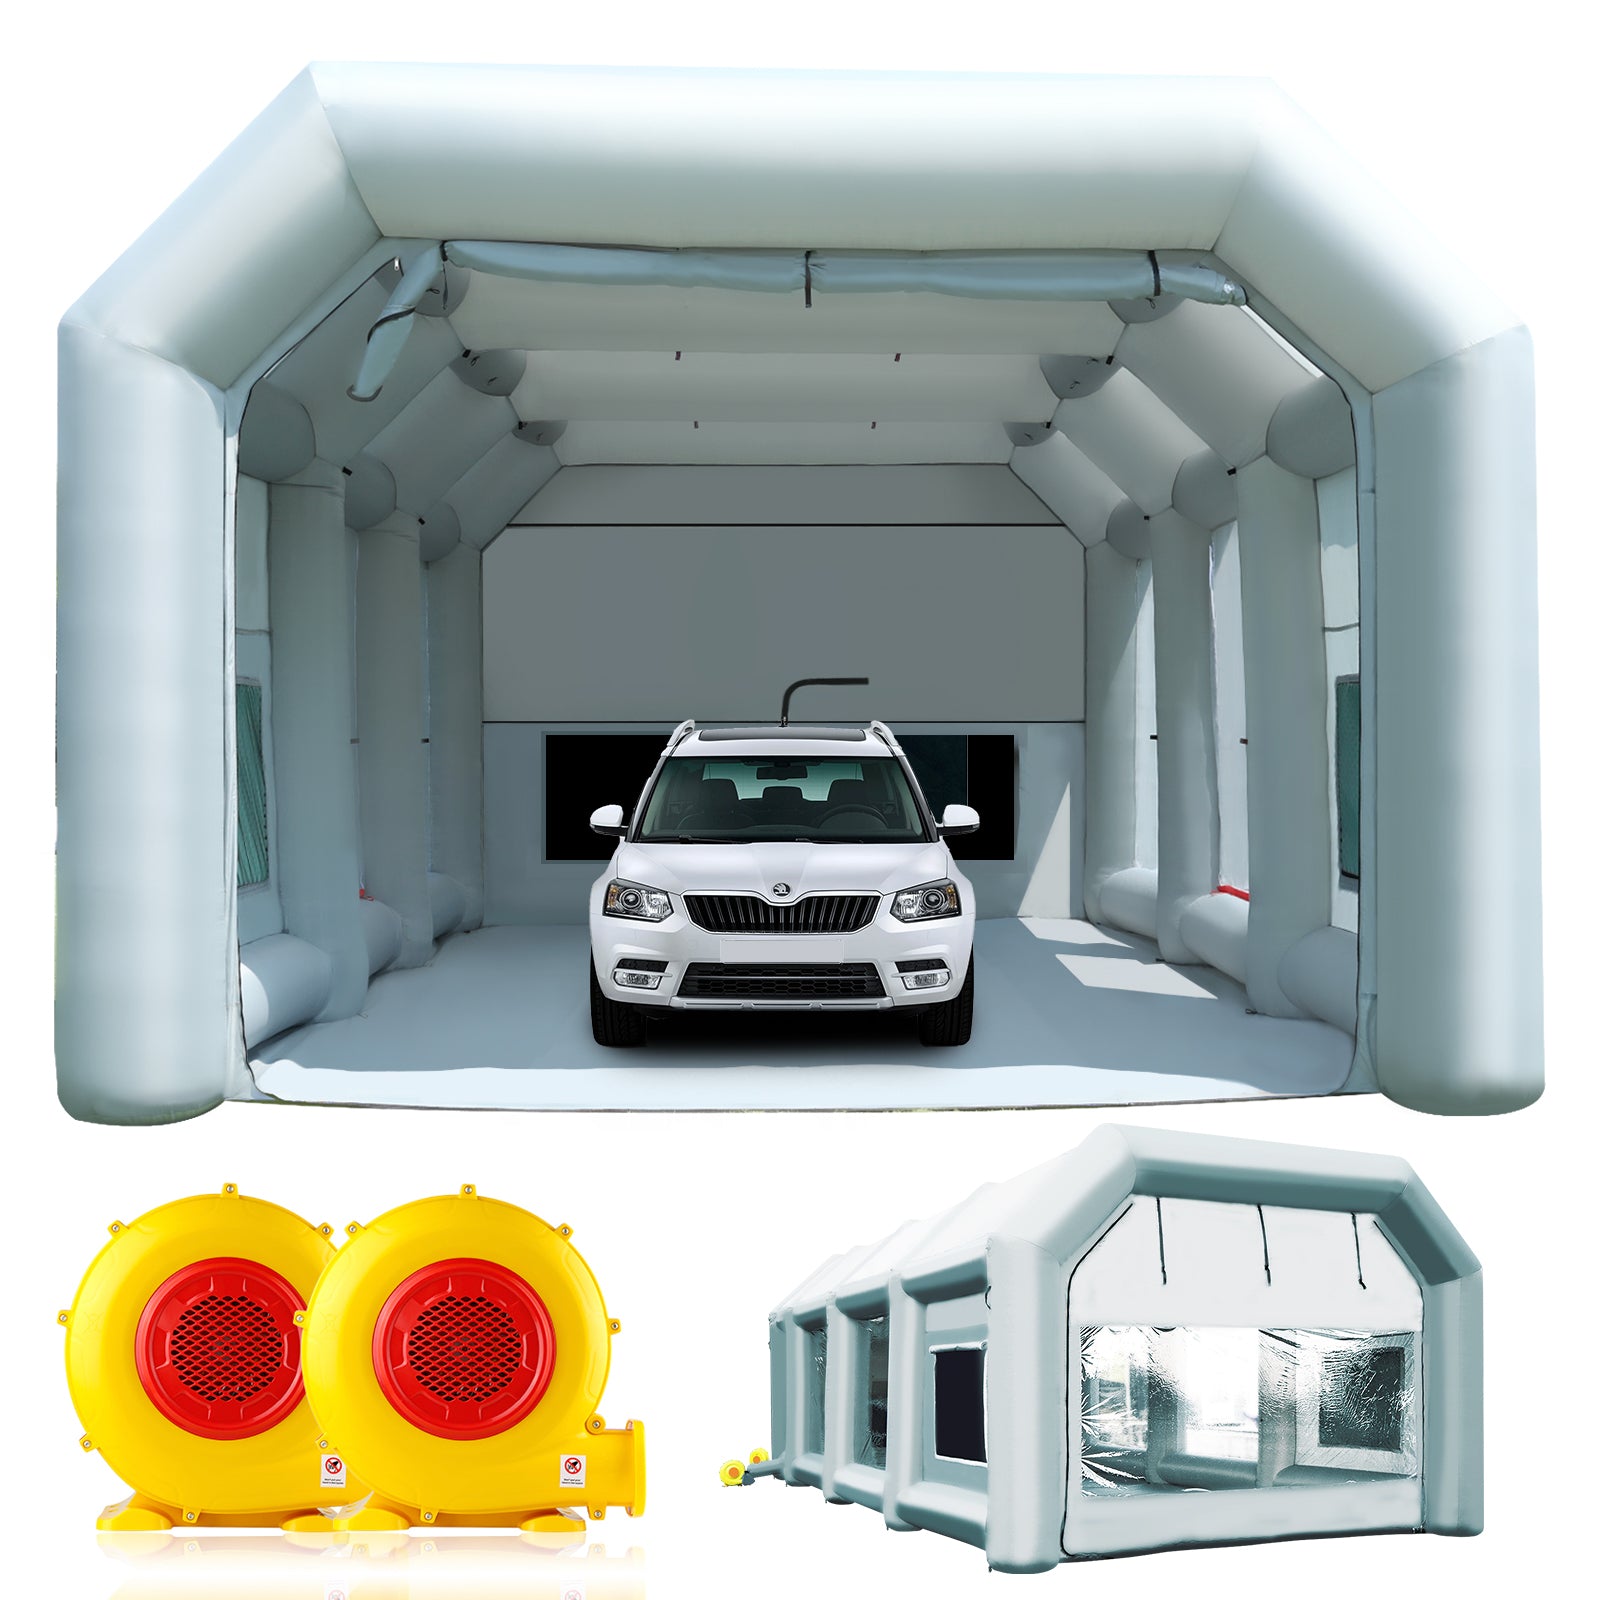 Sewinfla Professional Inflatable Paint Booth 39x20x13Ft with 2 Blowers (1100W+950W) & Air Filter System Portable Paint Booth Tent Garage Inflatable Spray Booth Painting for Cars